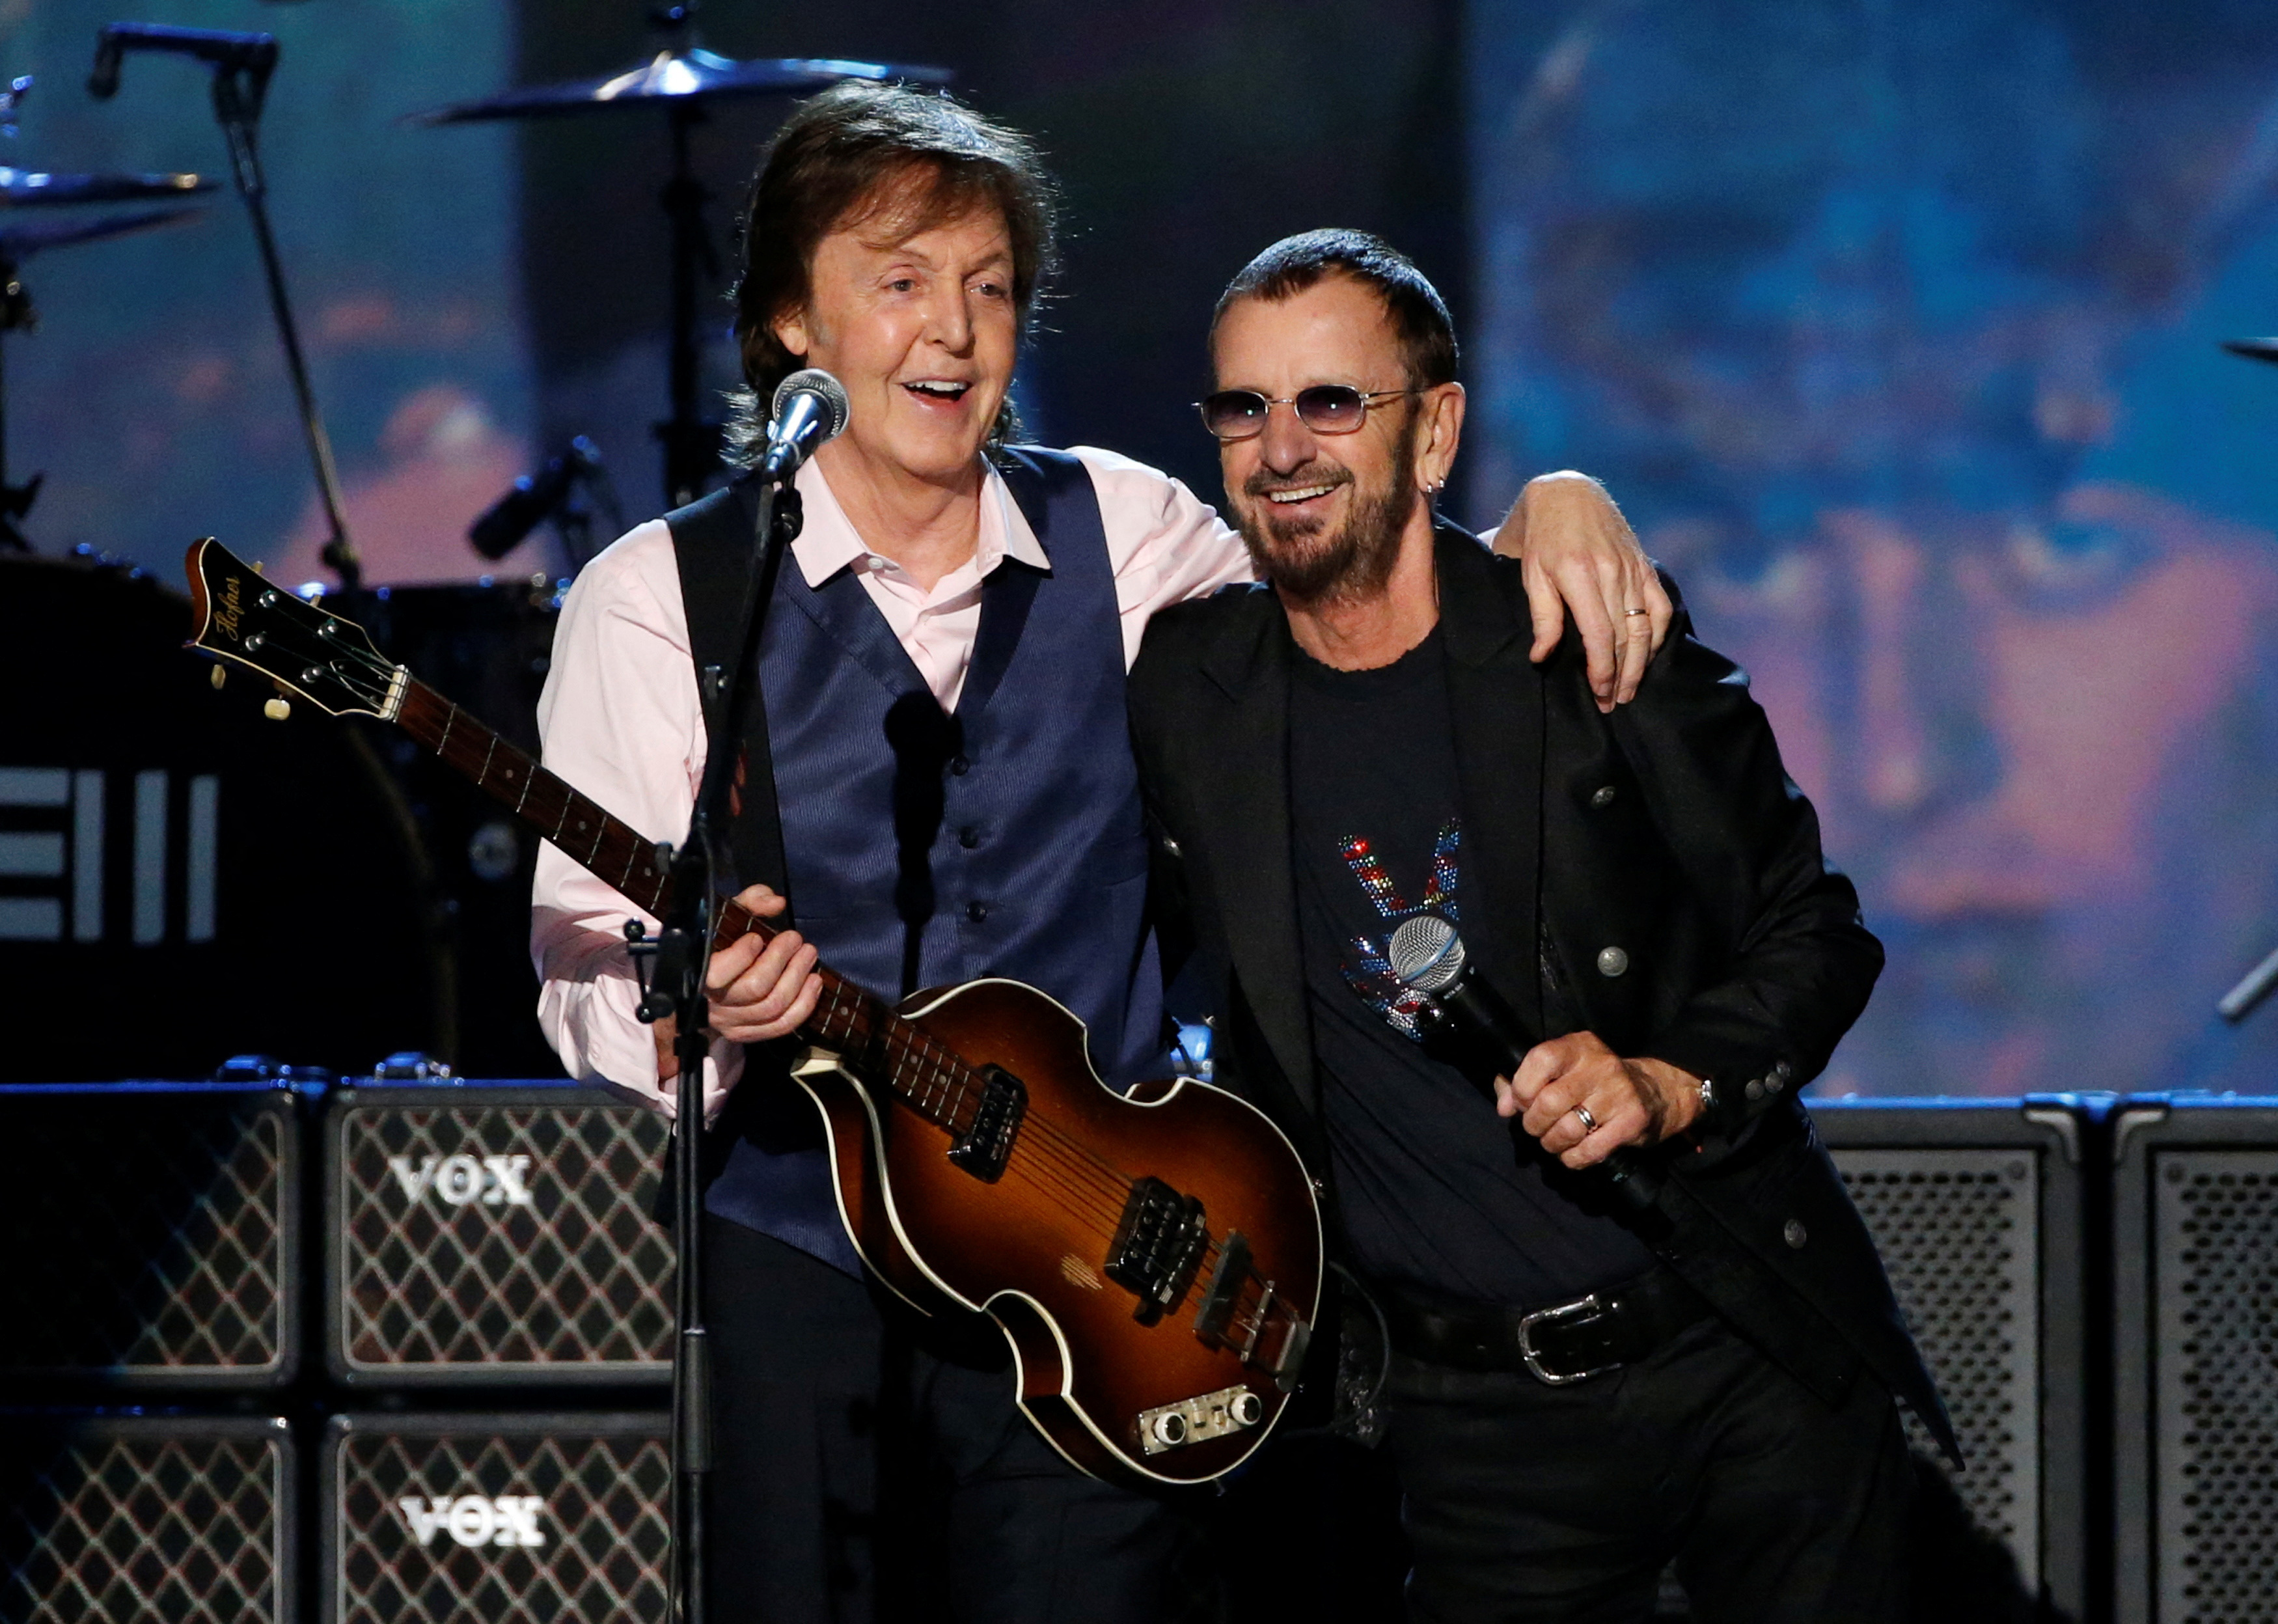 The Beatles New Song 'Now and Then': Single Review